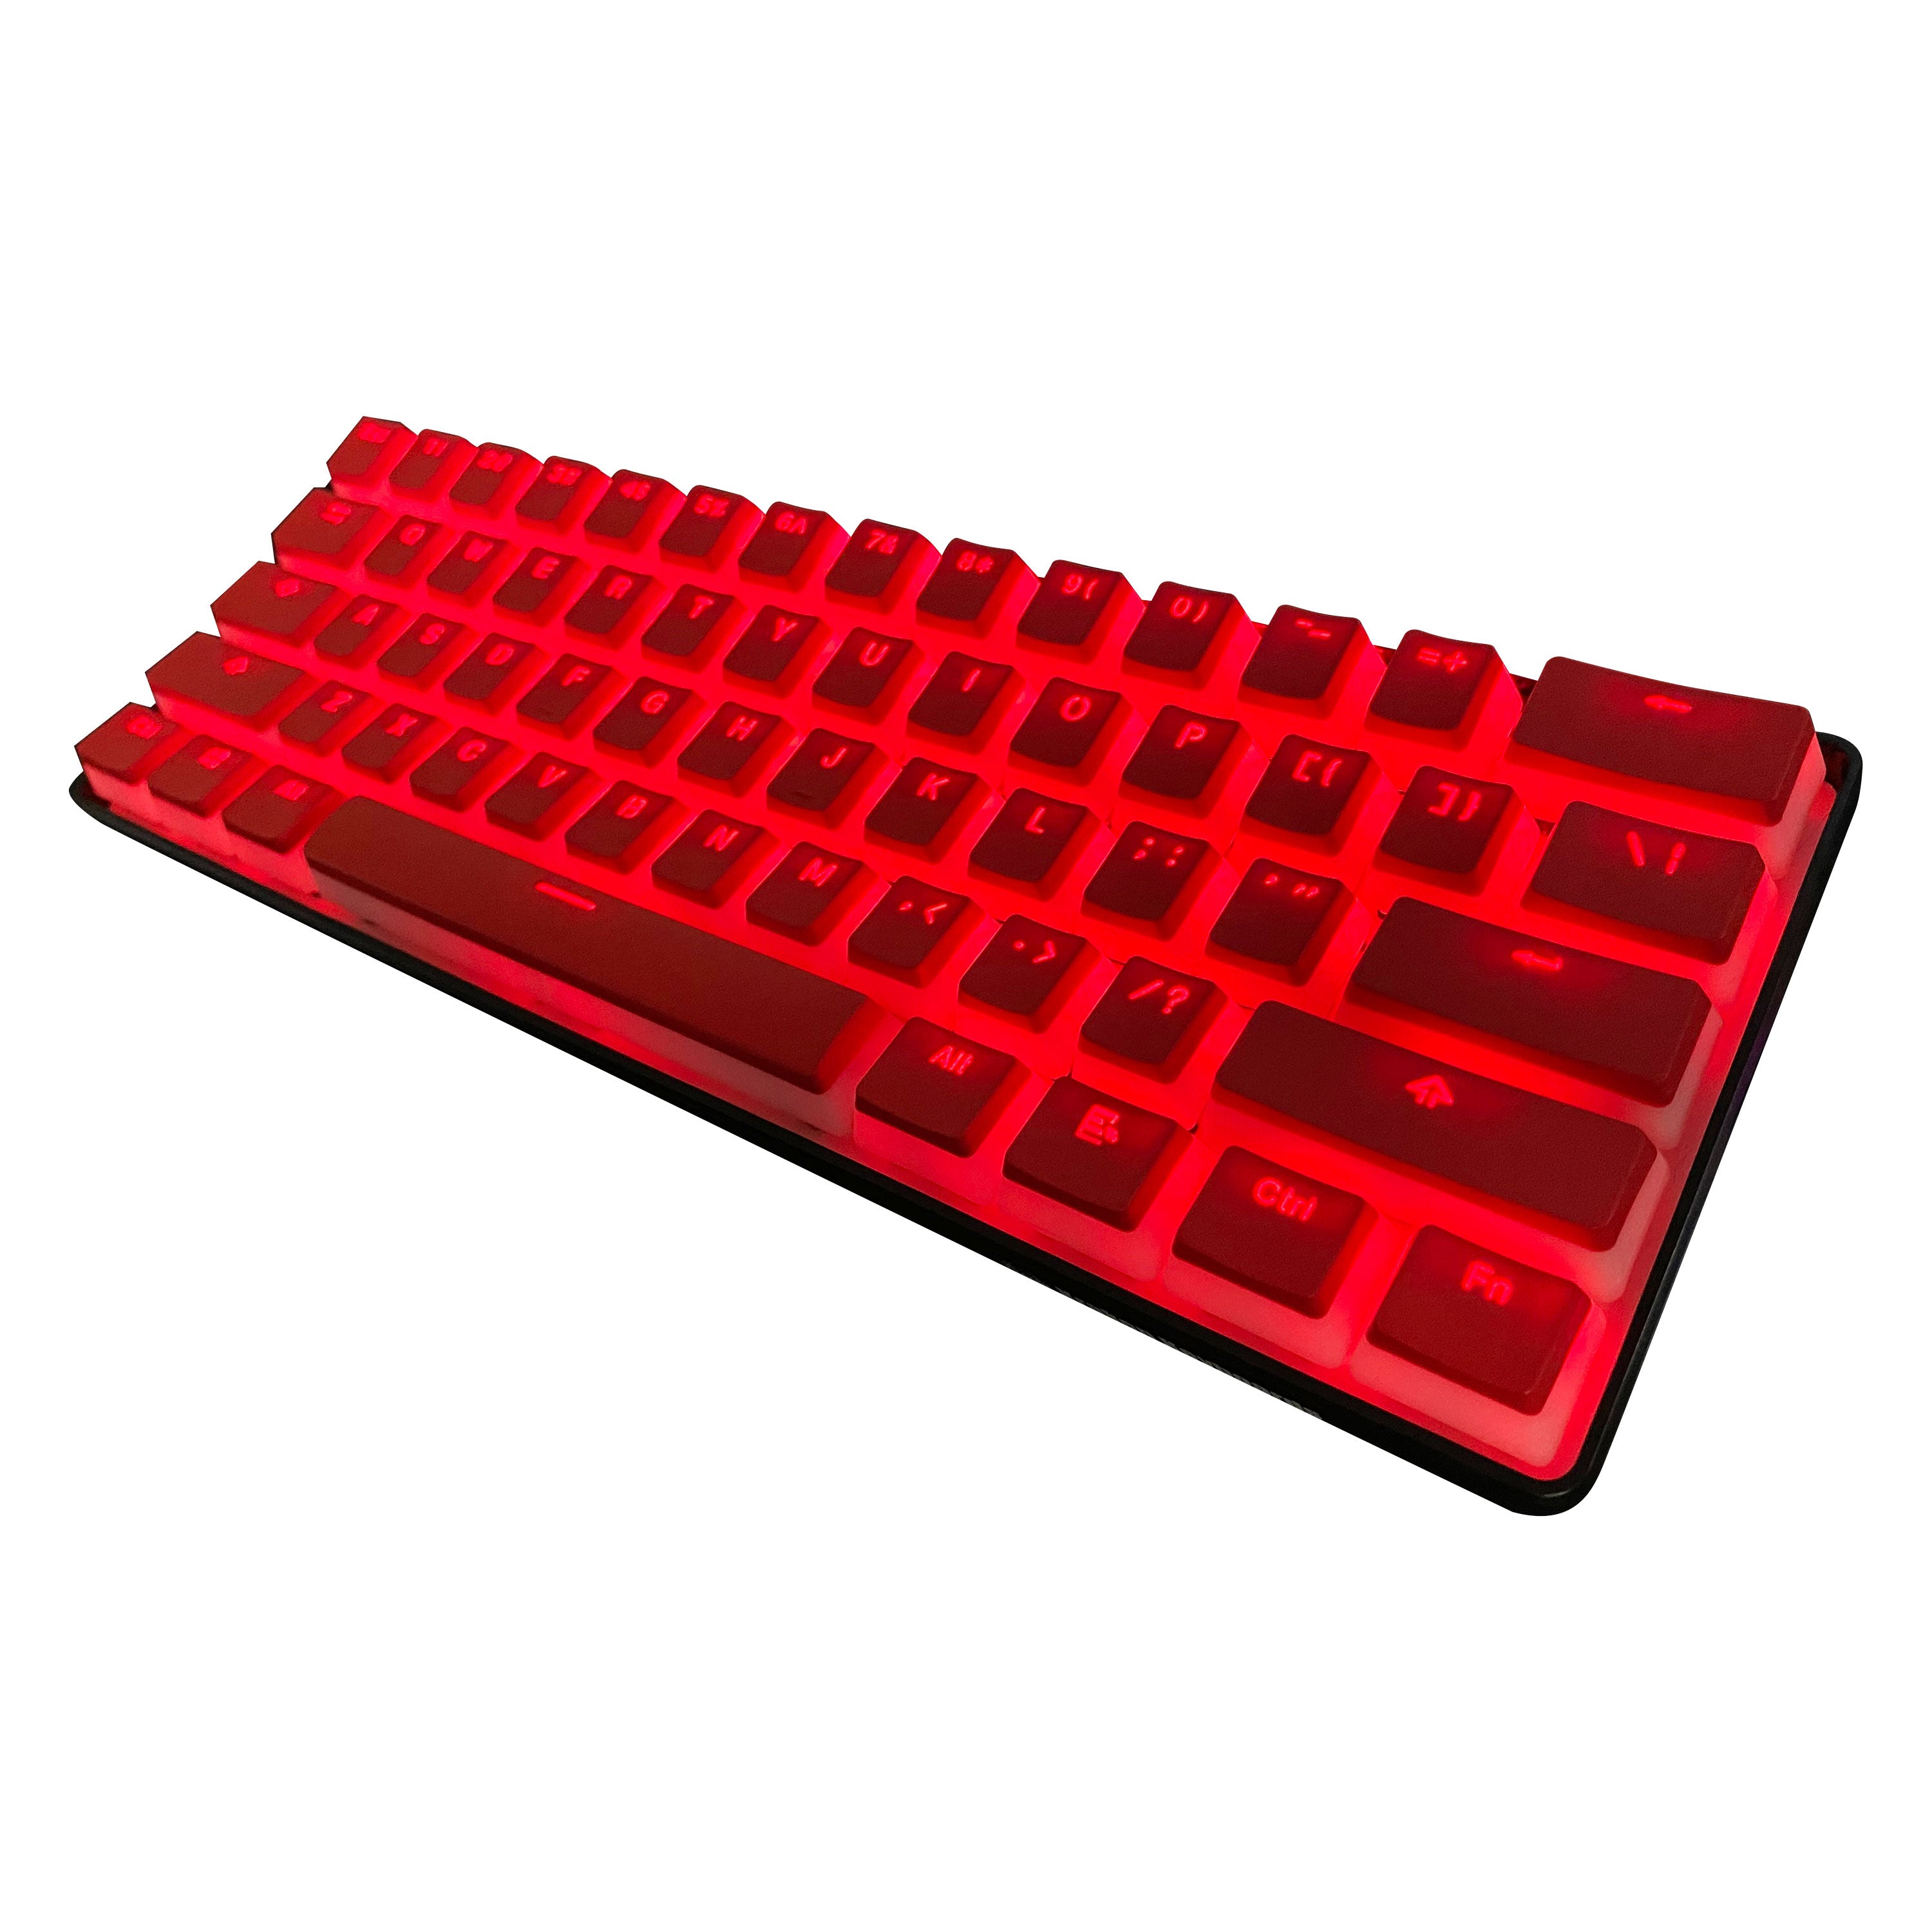 Red Pudding Keycap Set (ISO Keys included)